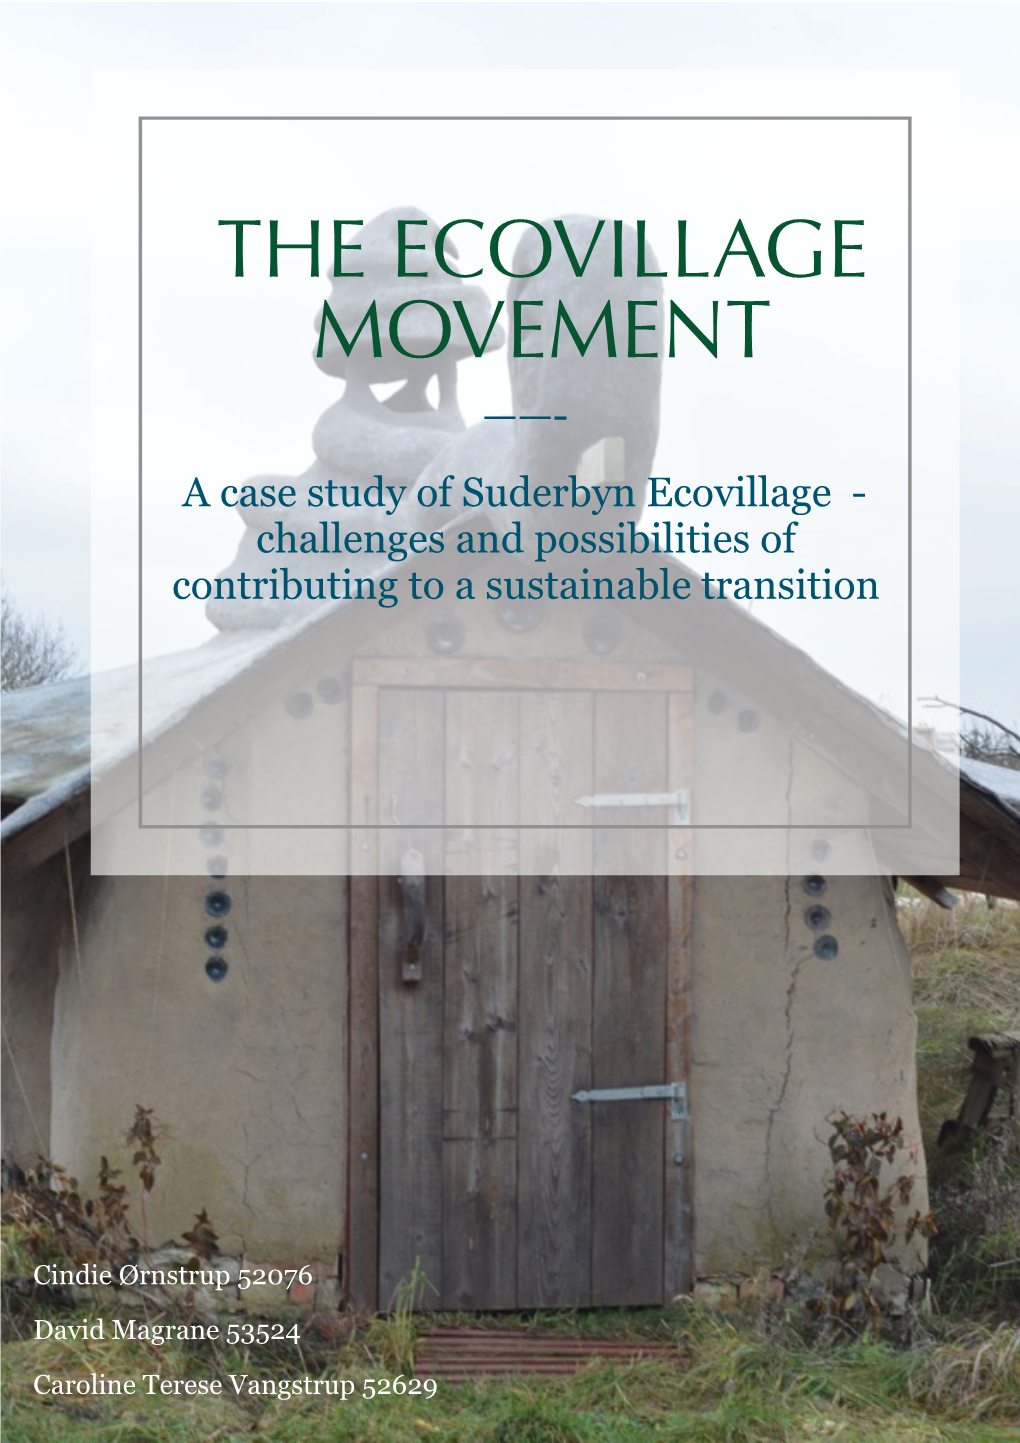 THE ECOVILLAGE MOVEMENT ——- a Case Study of Suderbyn Ecovillage - Challenges and Possibilities of Contributing to a Sustainable Transition